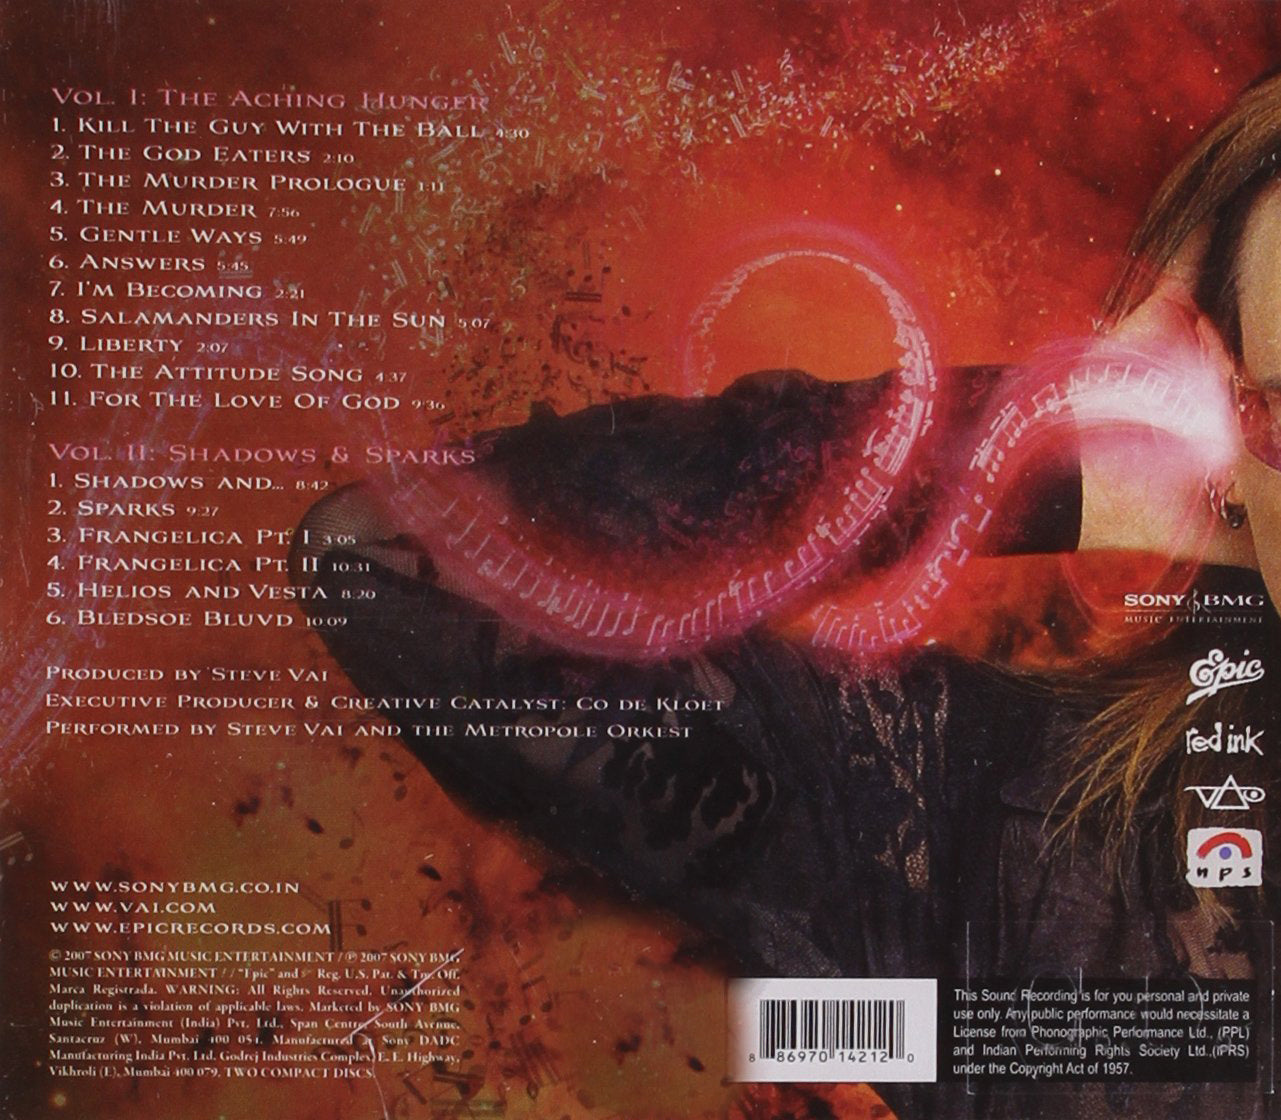 back of steve vai sound theories vol 1 and 2.  the artwork is red and black, and features the track listing in white on the left side of the art. the right side is an image of part of steve vai's face, with his hand up by his ear. he is surrounded by red dust trails and music trails.